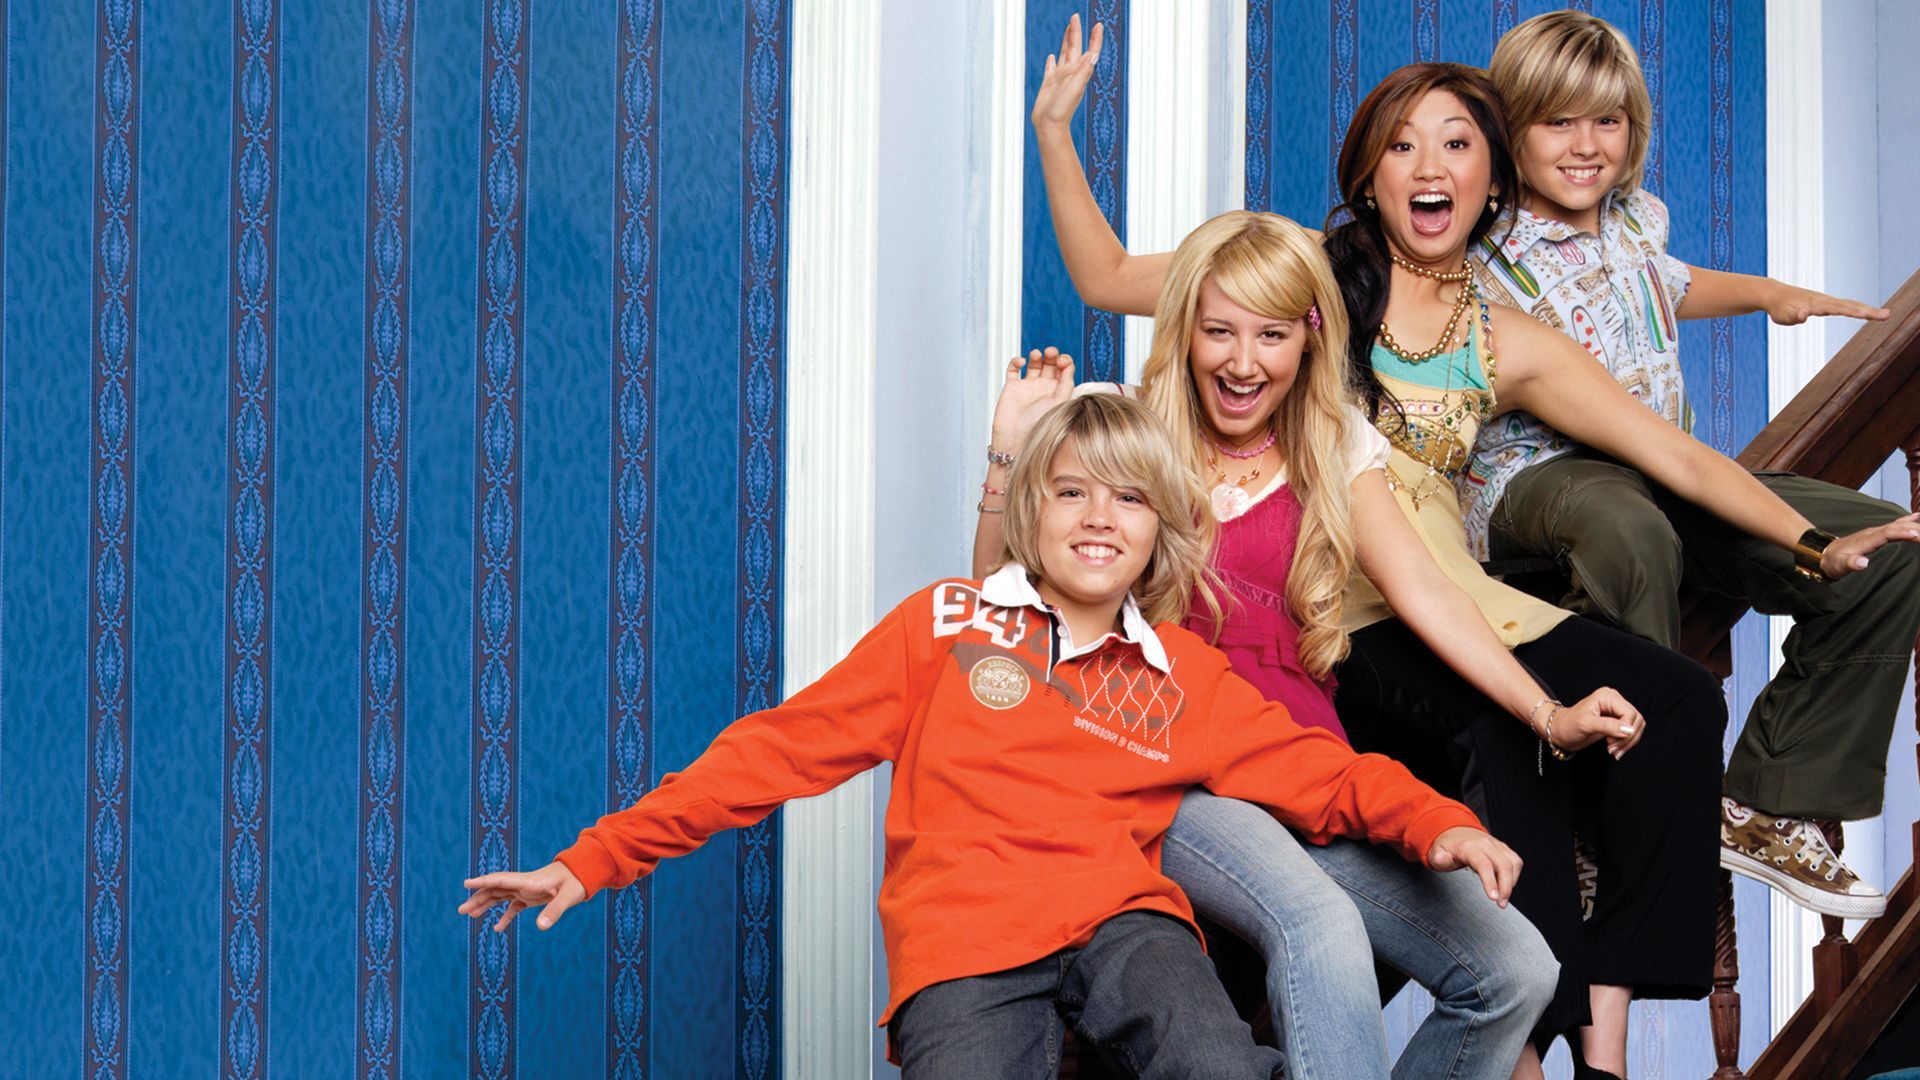 Watch The Suite Life of Zack & Cody Full Episodes. Disney+